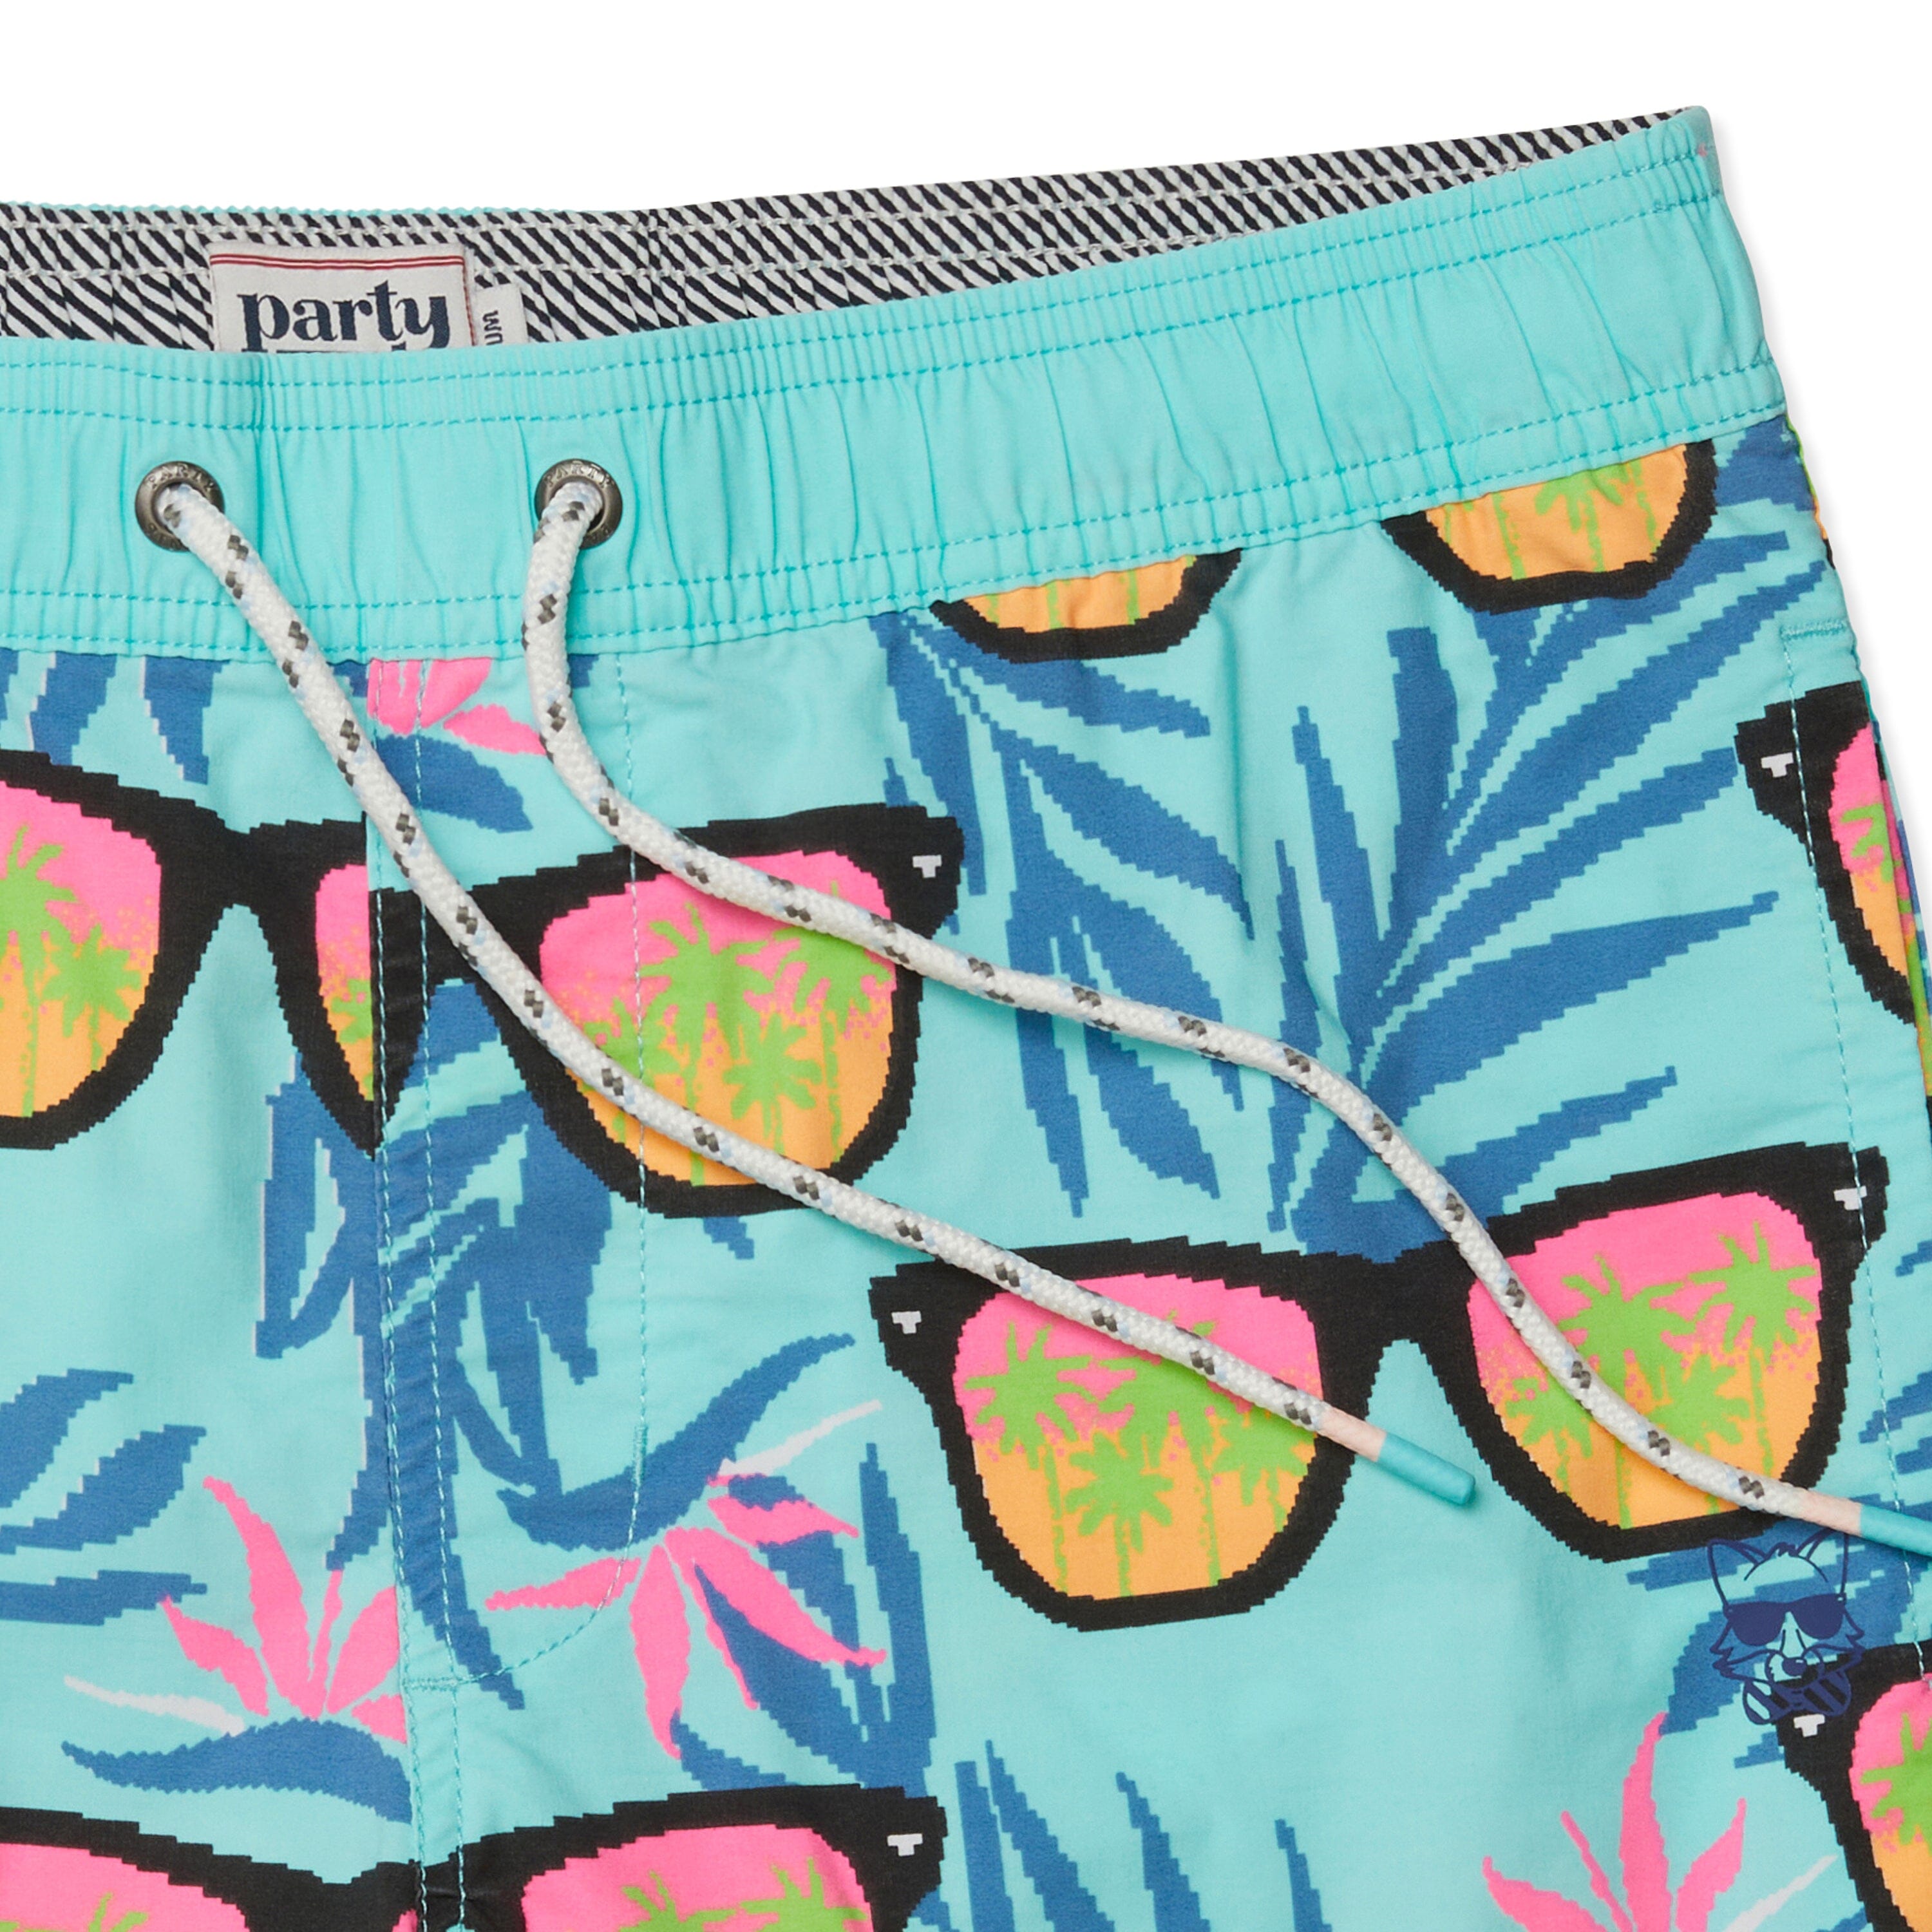 SHADY PARTY STARTER SHORT - MINT GREEN PRINTED SHORTS PARTY PANTS 